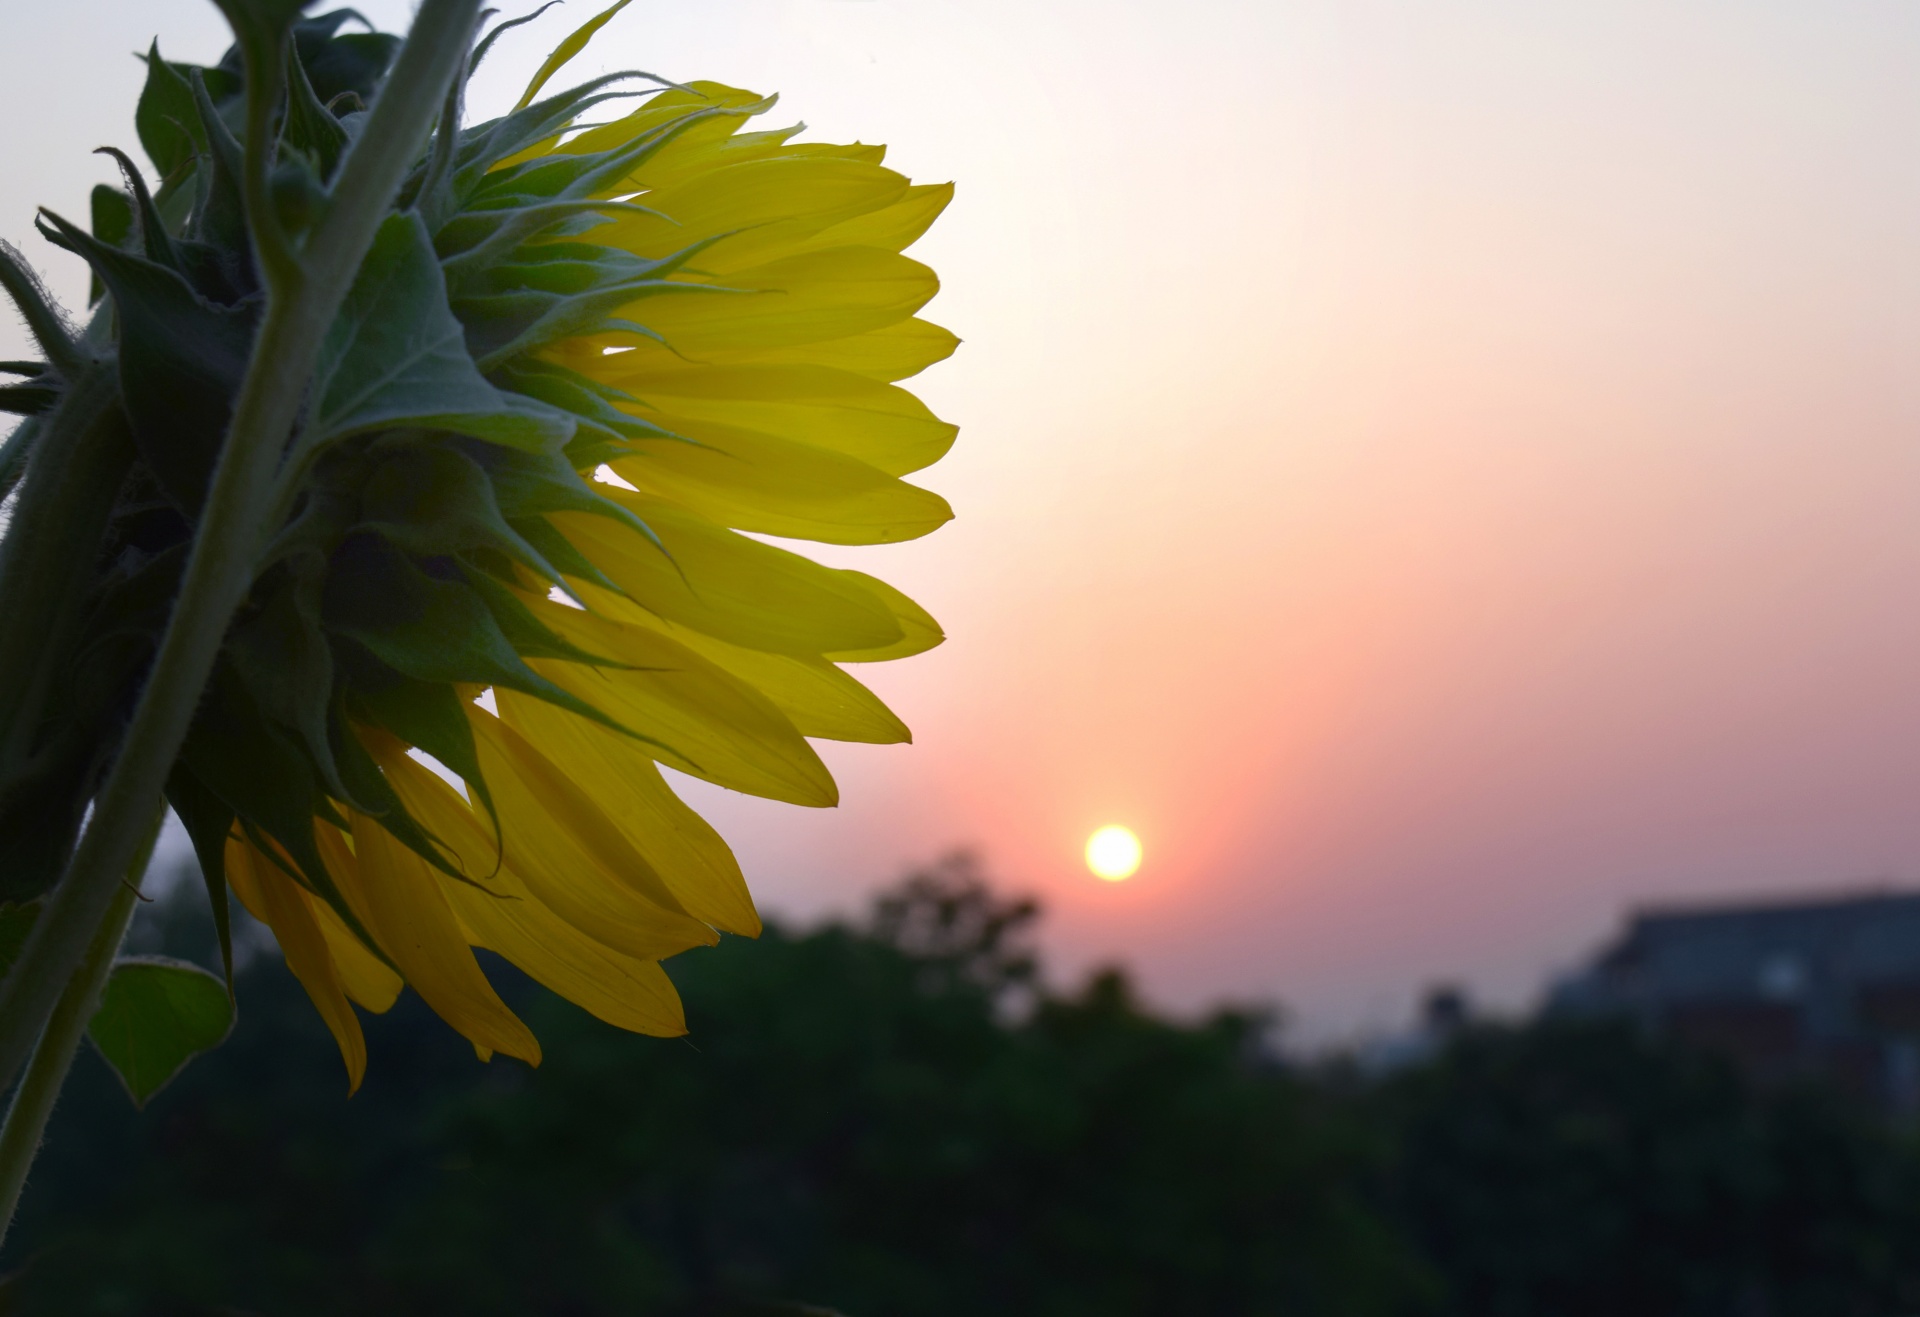 Sunflower And The Morning Sun